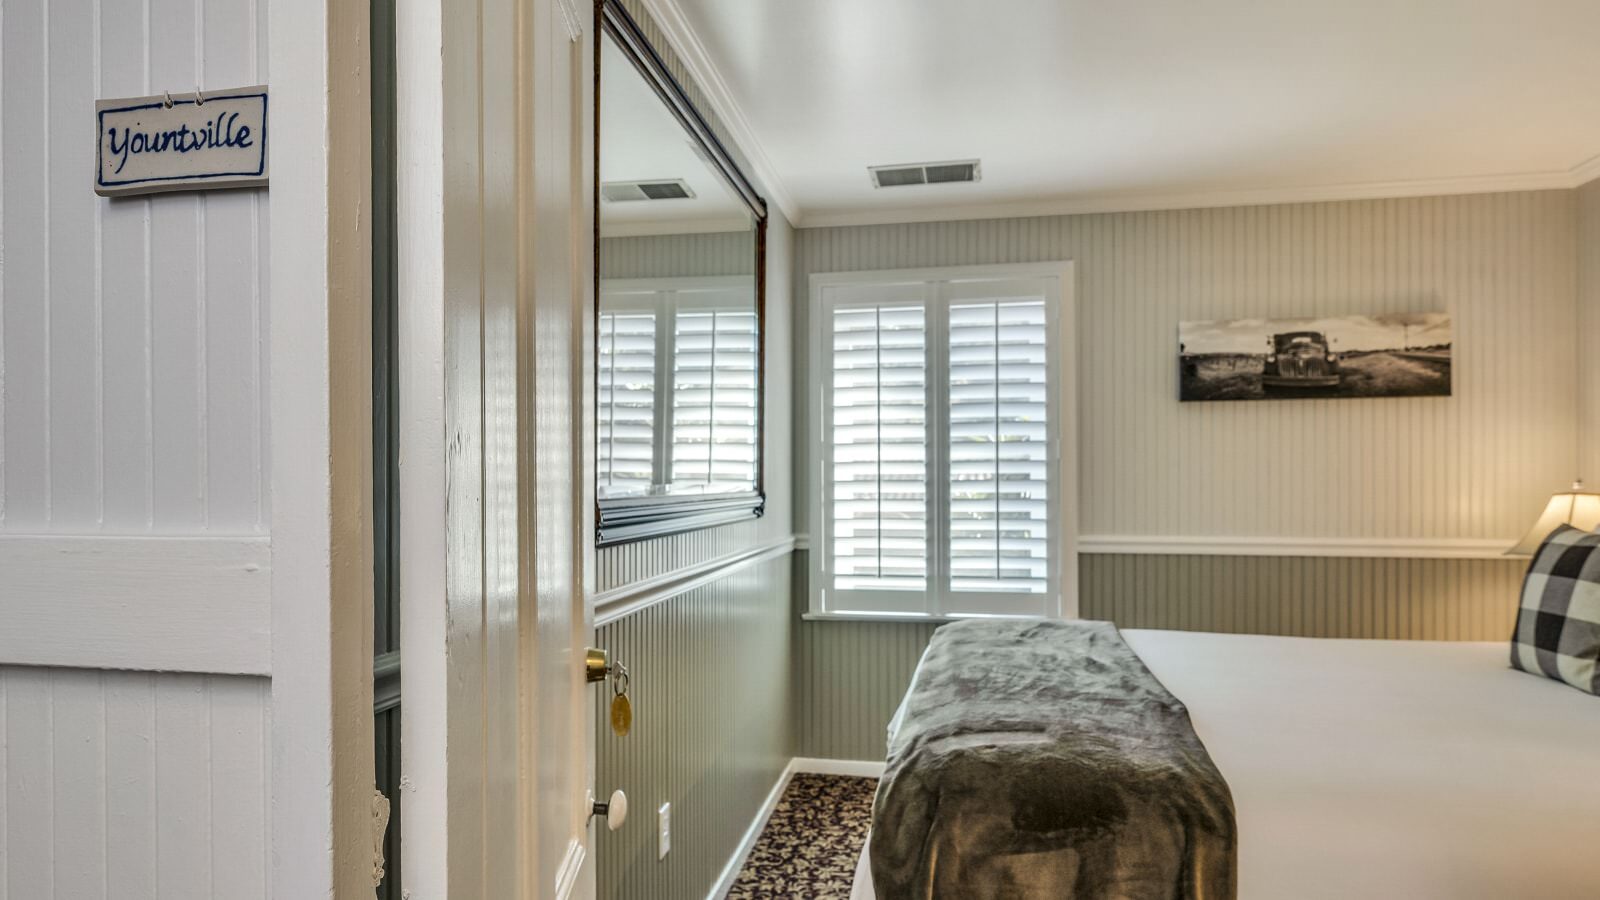 View into bedroom with white walls, light gray wainscotting, floral carpeting, and white bedding